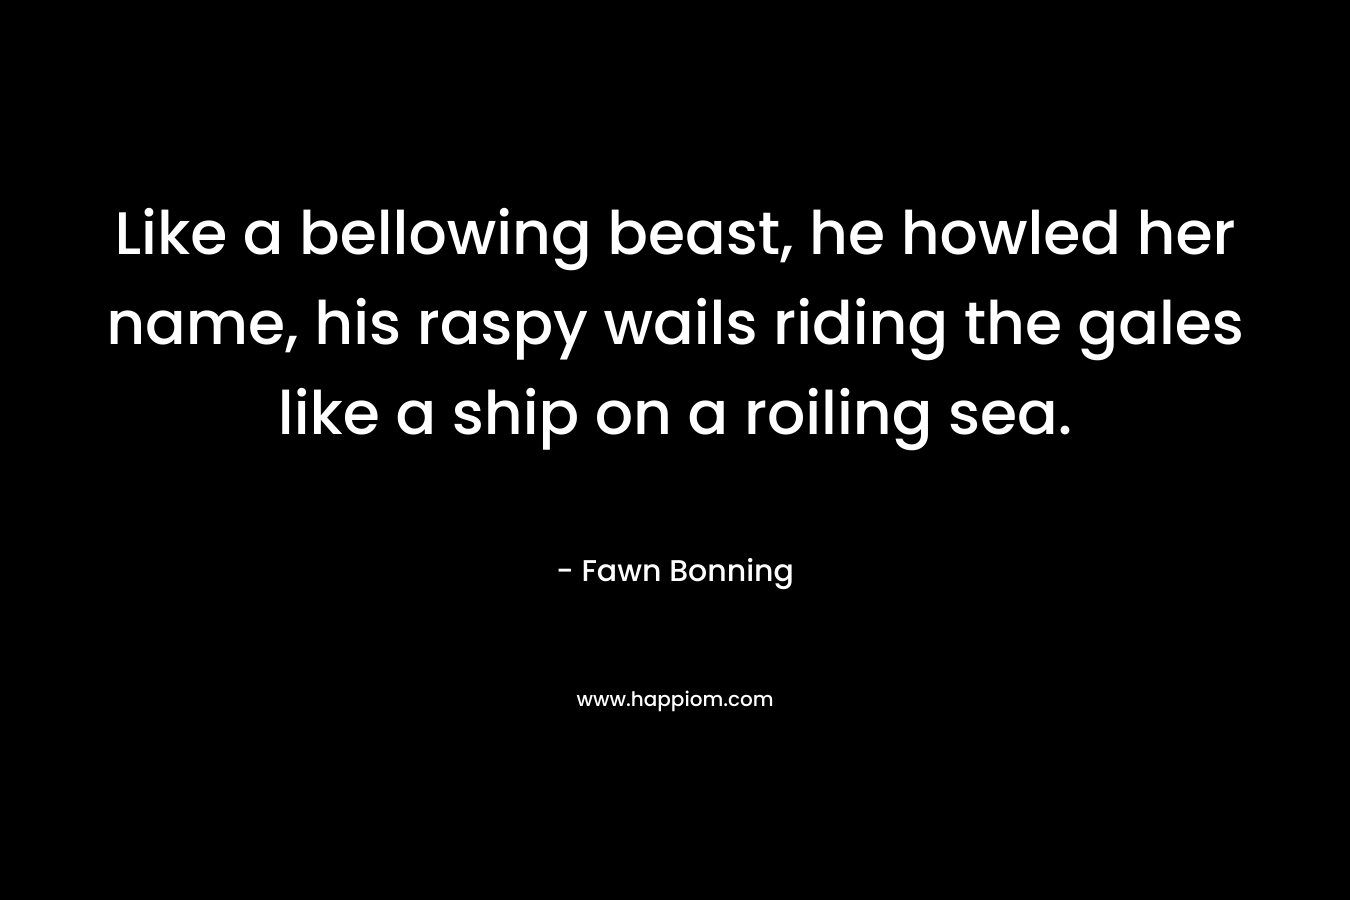 Like a bellowing beast, he howled her name, his raspy wails riding the gales like a ship on a roiling sea.